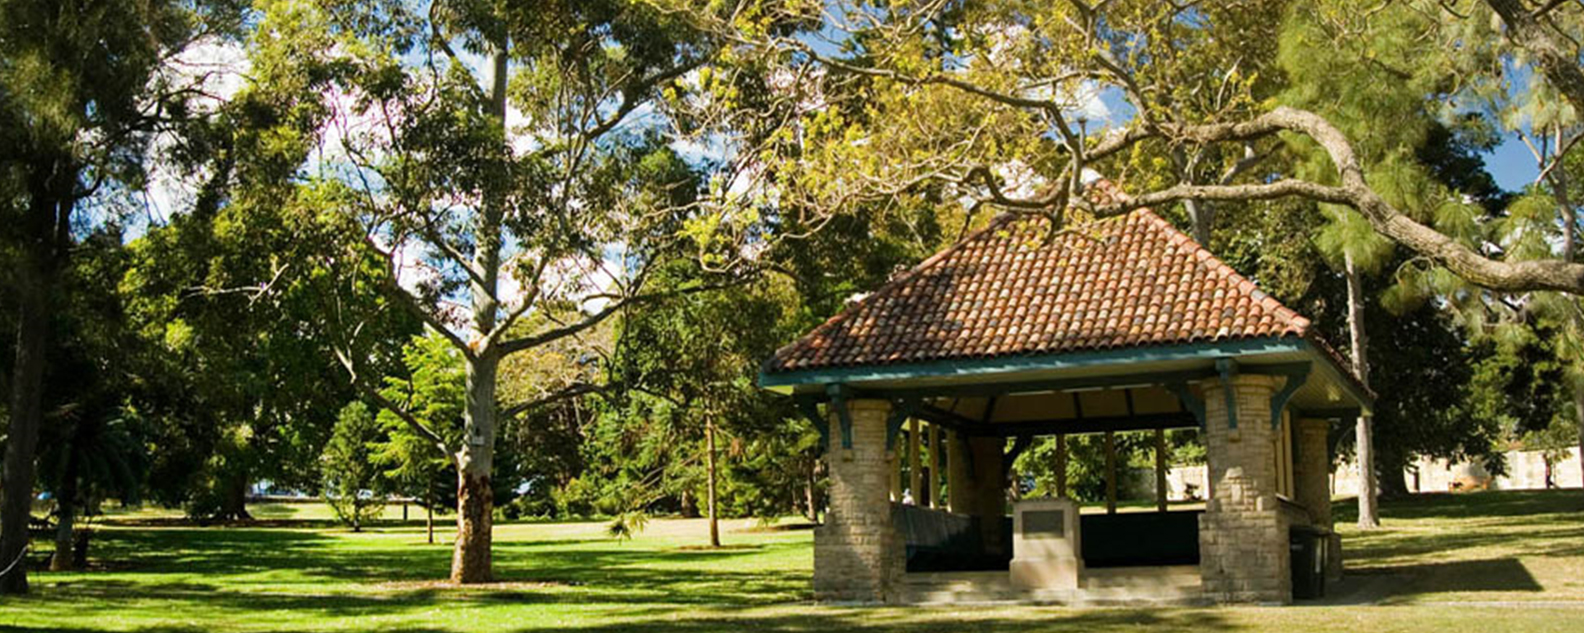 picnic shelter and shady lawn